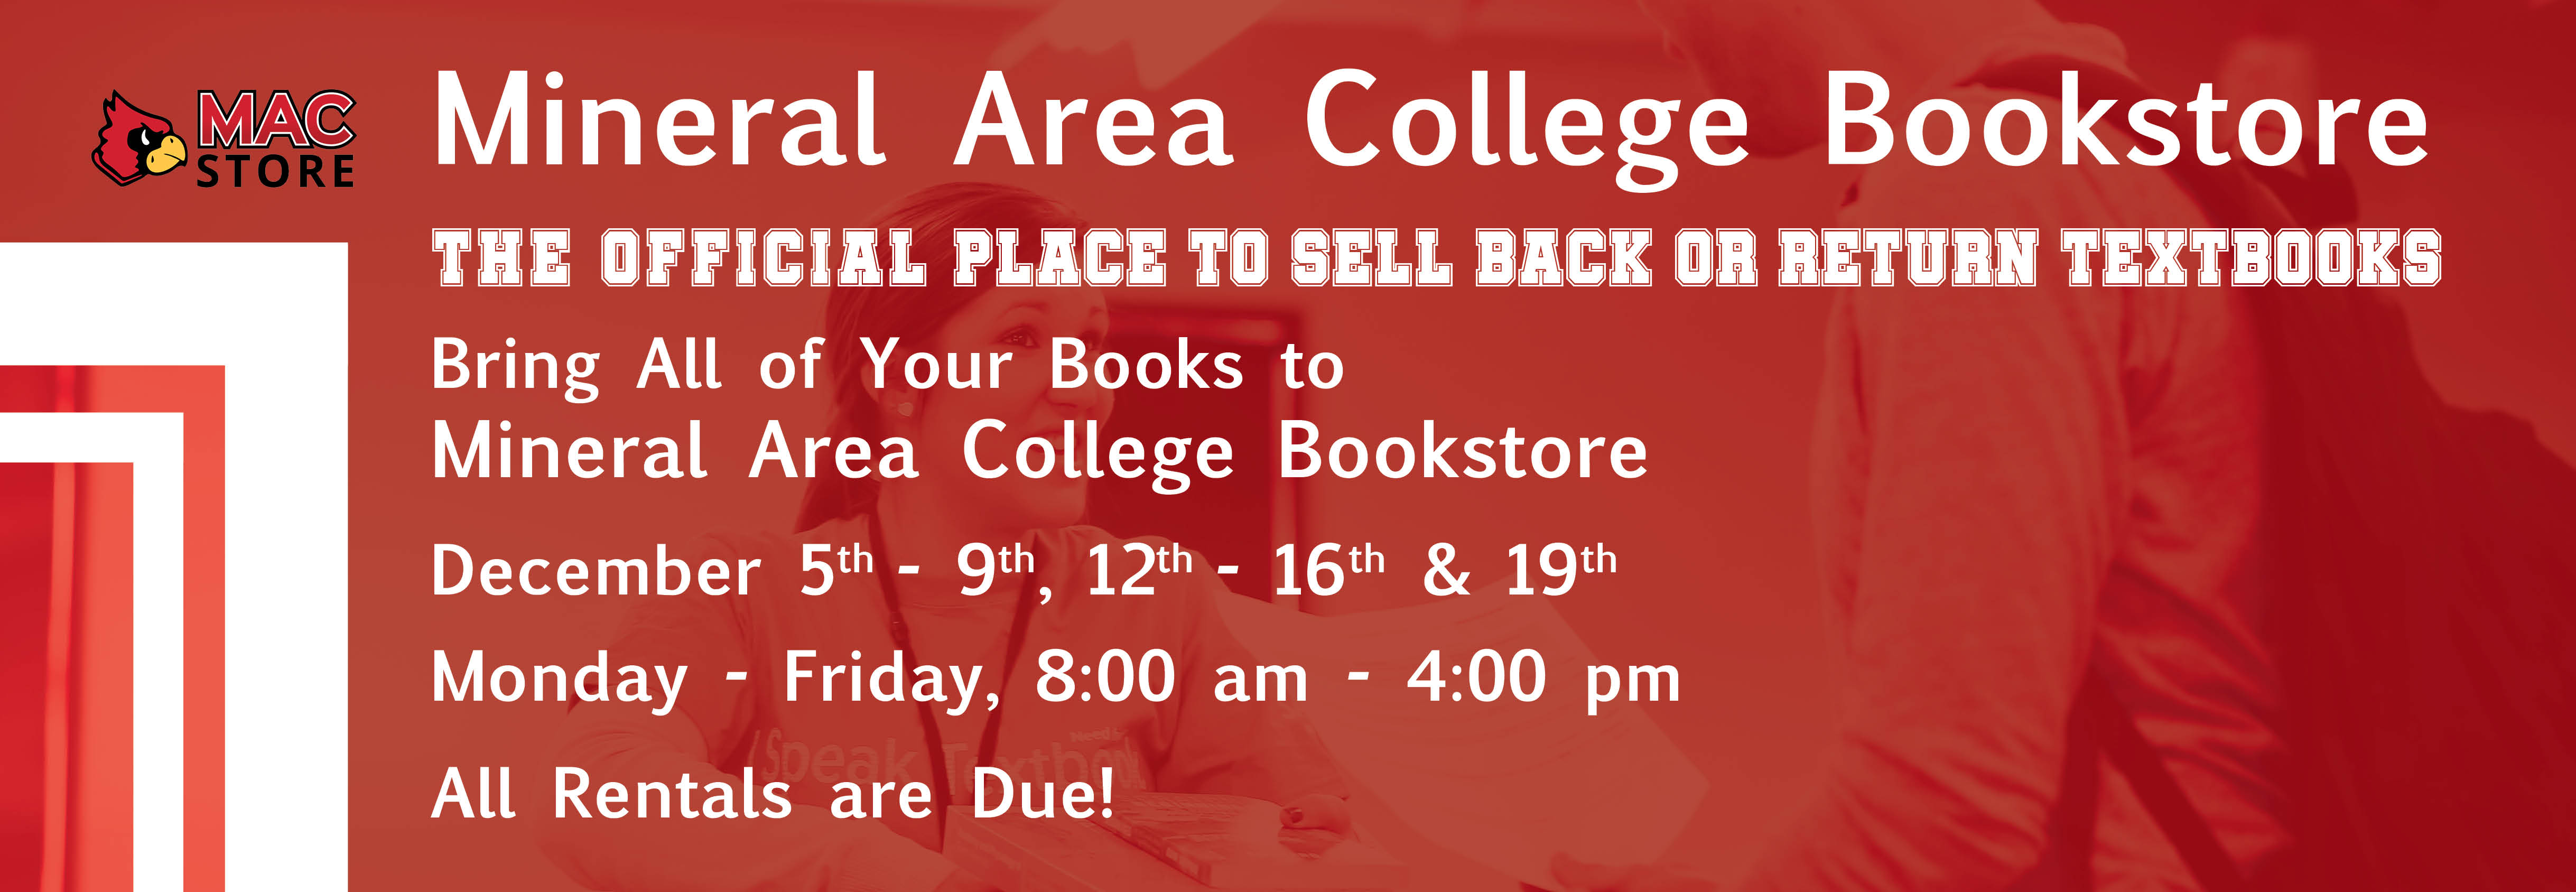 Mineral Area College buyback information